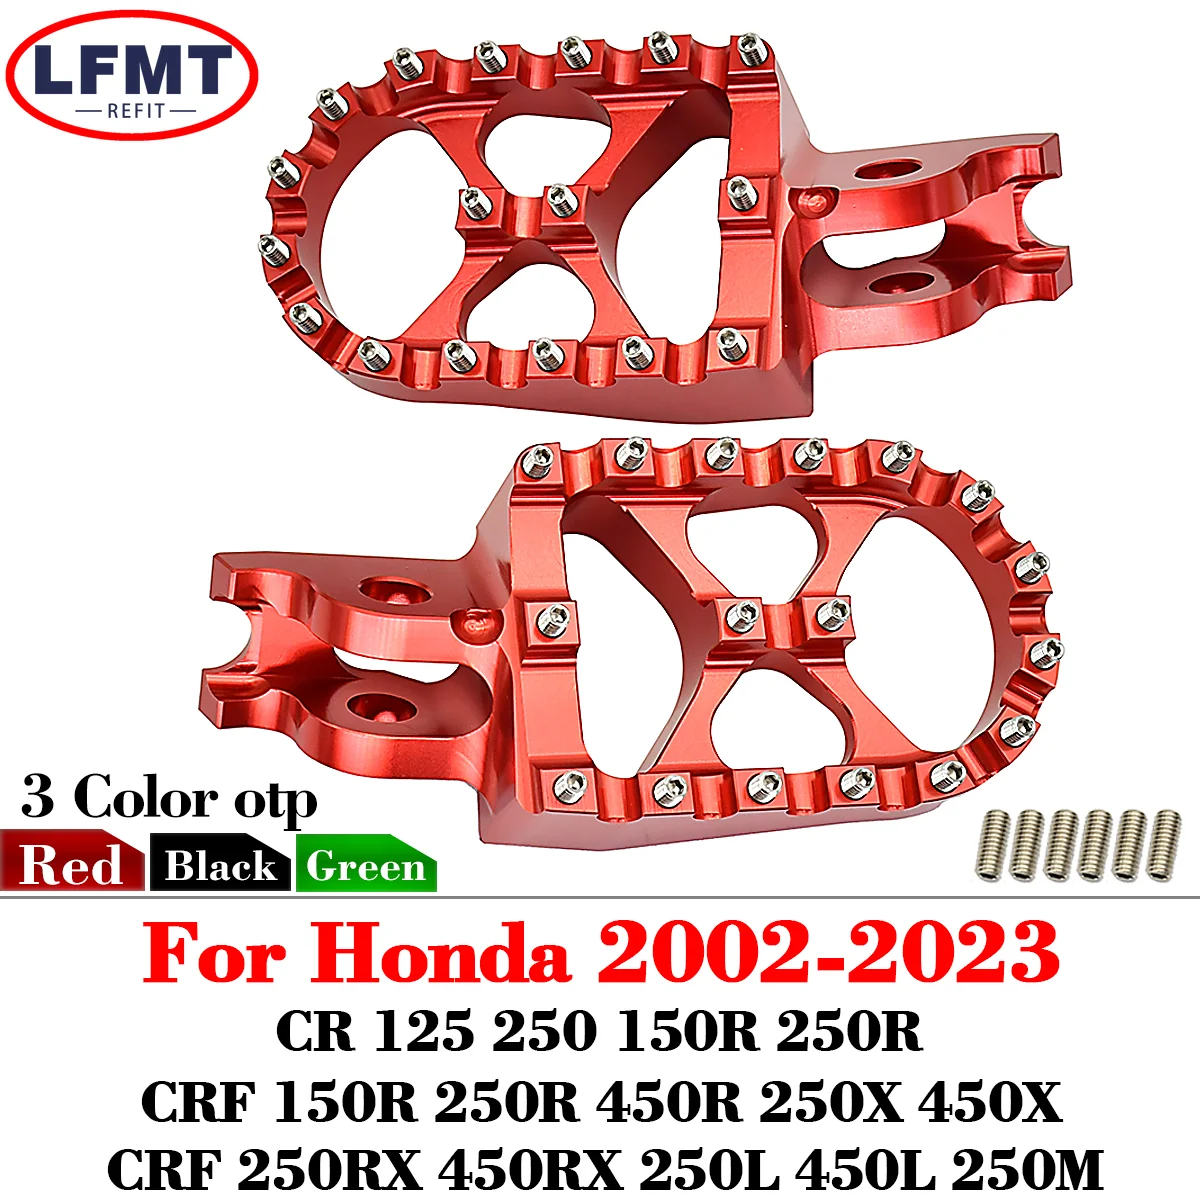 Torcycle cnc footrest footpegs foot pegs pedals for honda crf 150r 250r 450r cr 125 250 thumb200